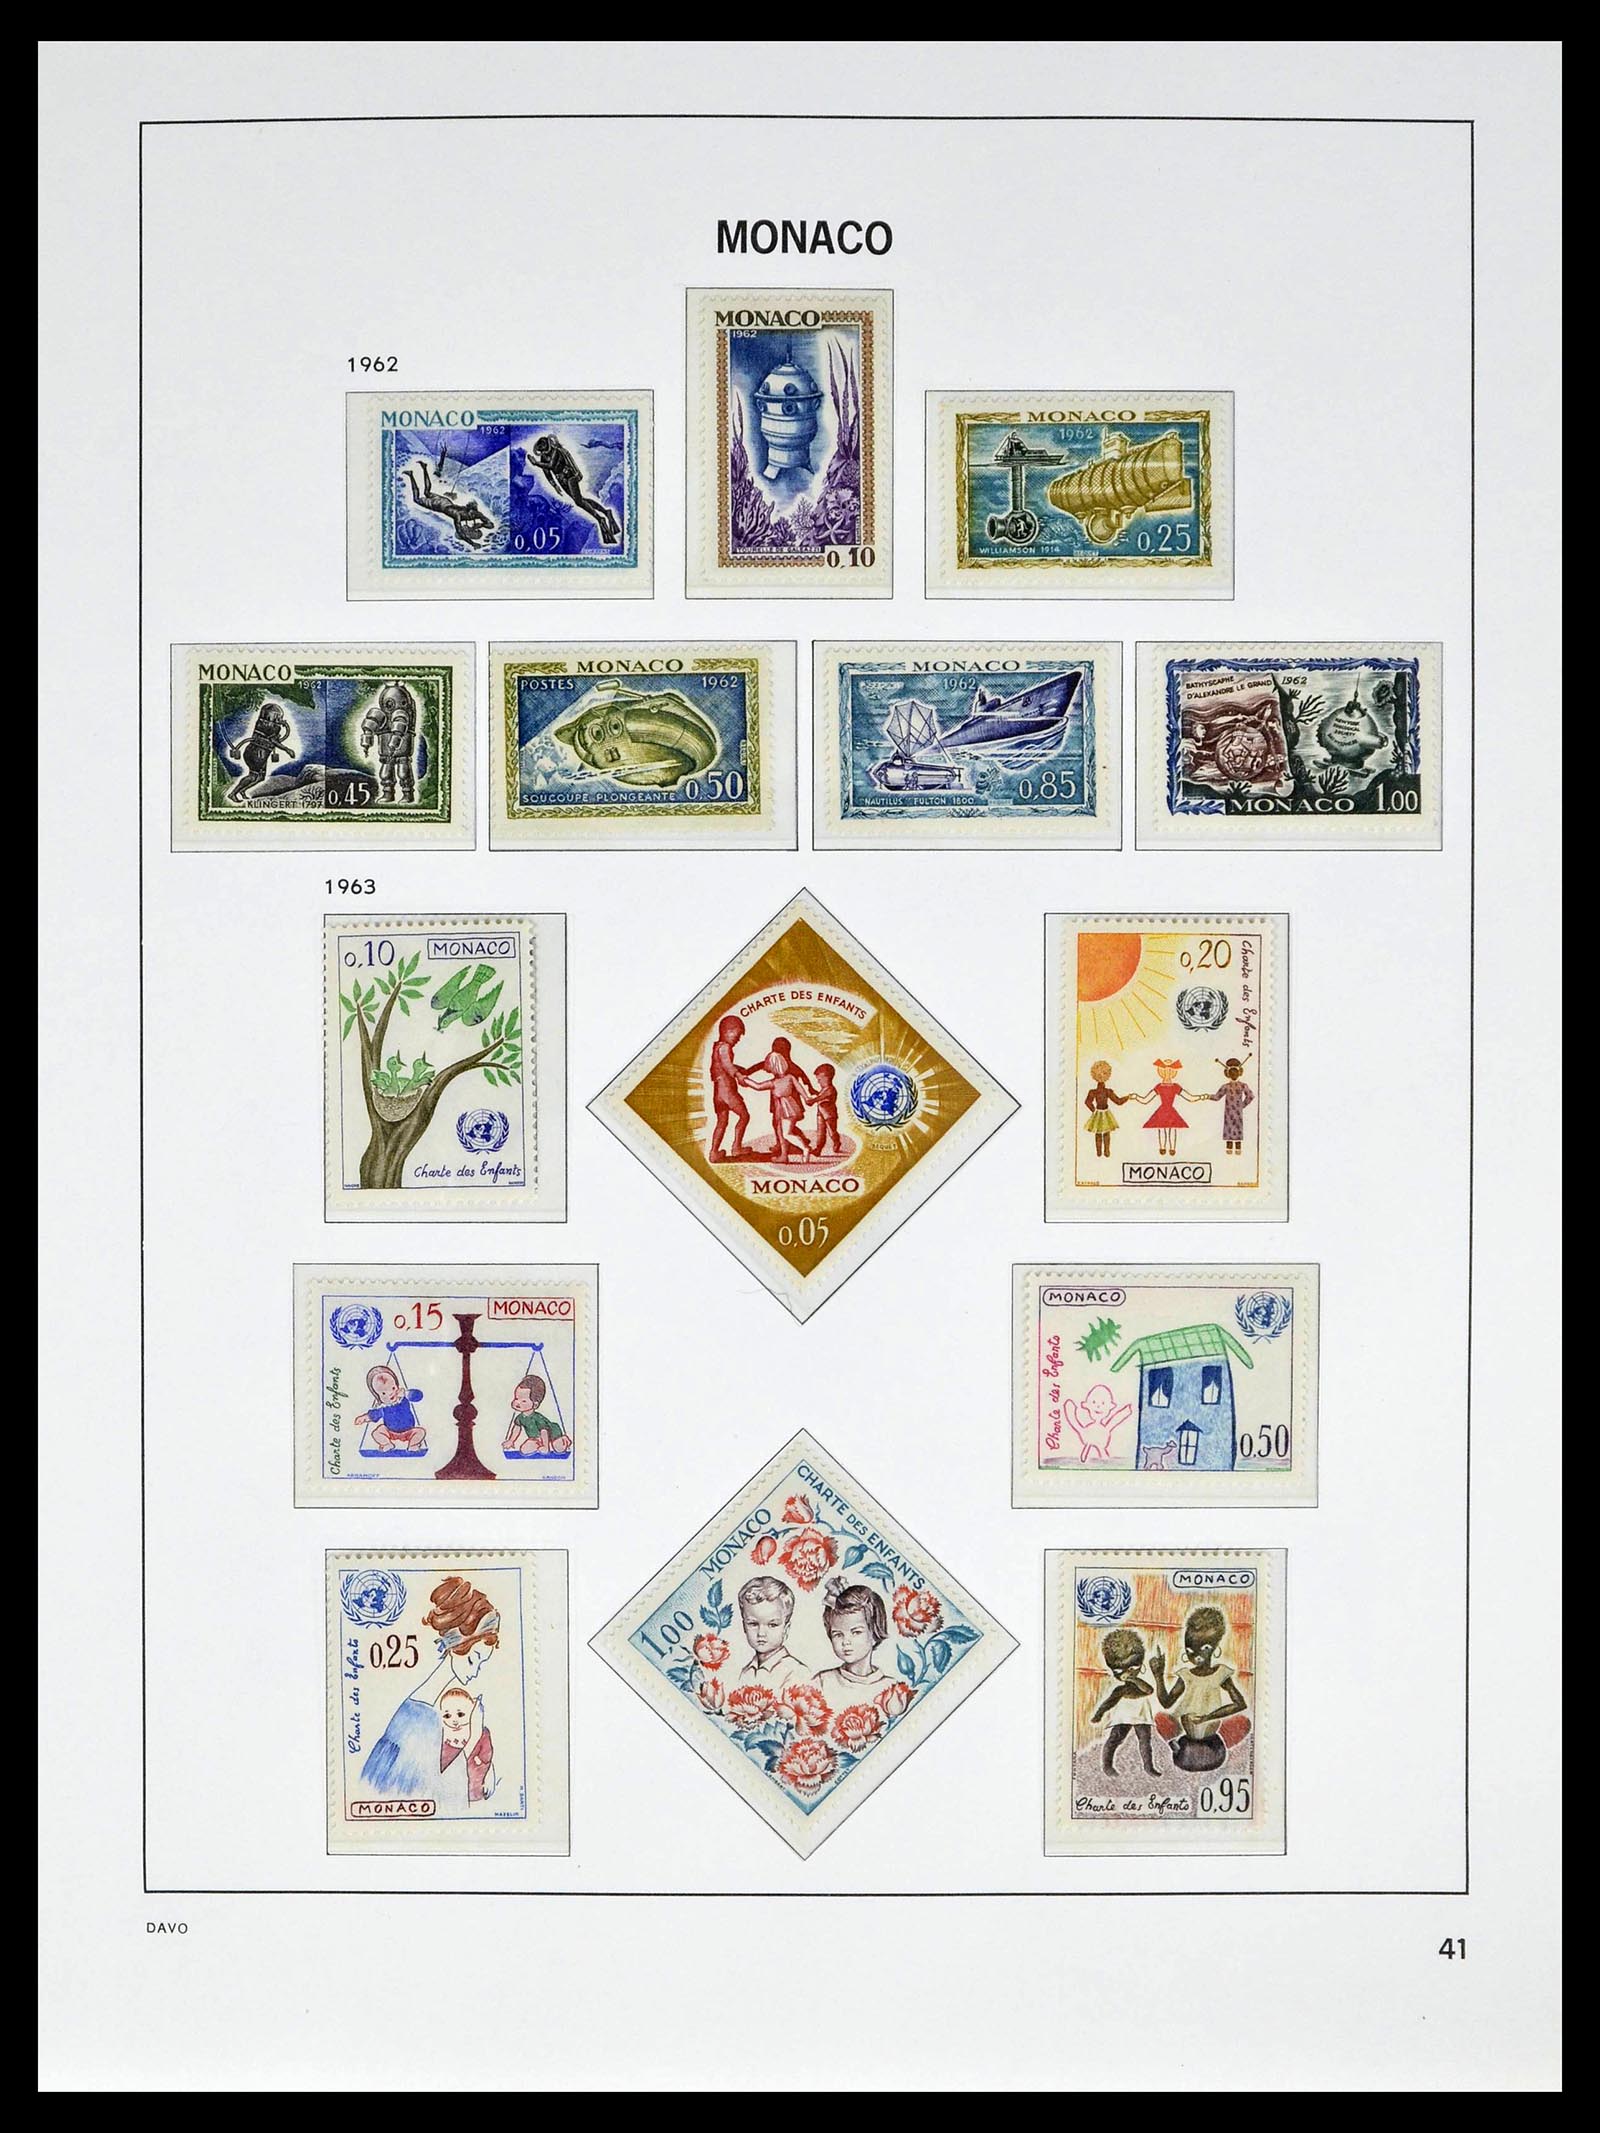 39110 0045 - Stamp collection 39110 Monaco complete 1885-1994.